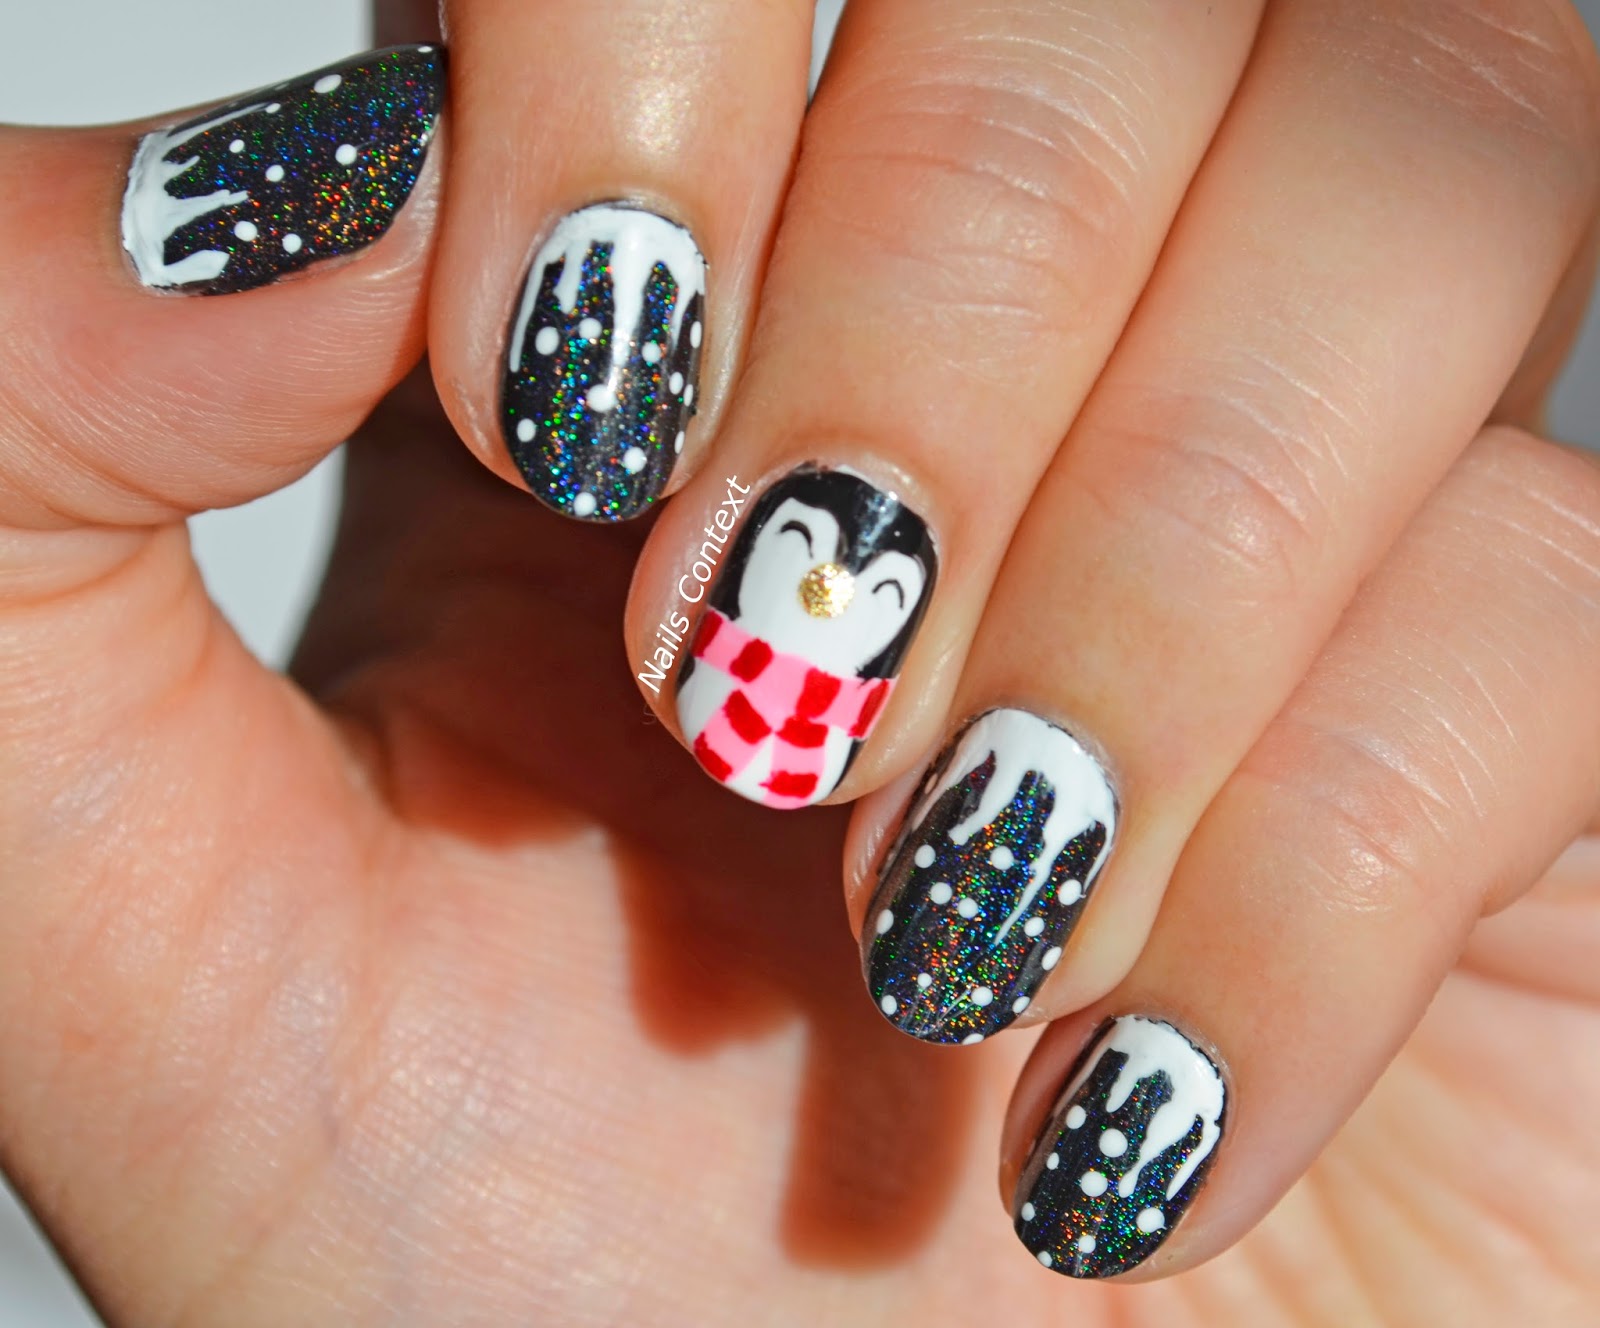 5. Quick and Easy Penguin Nails - wide 2